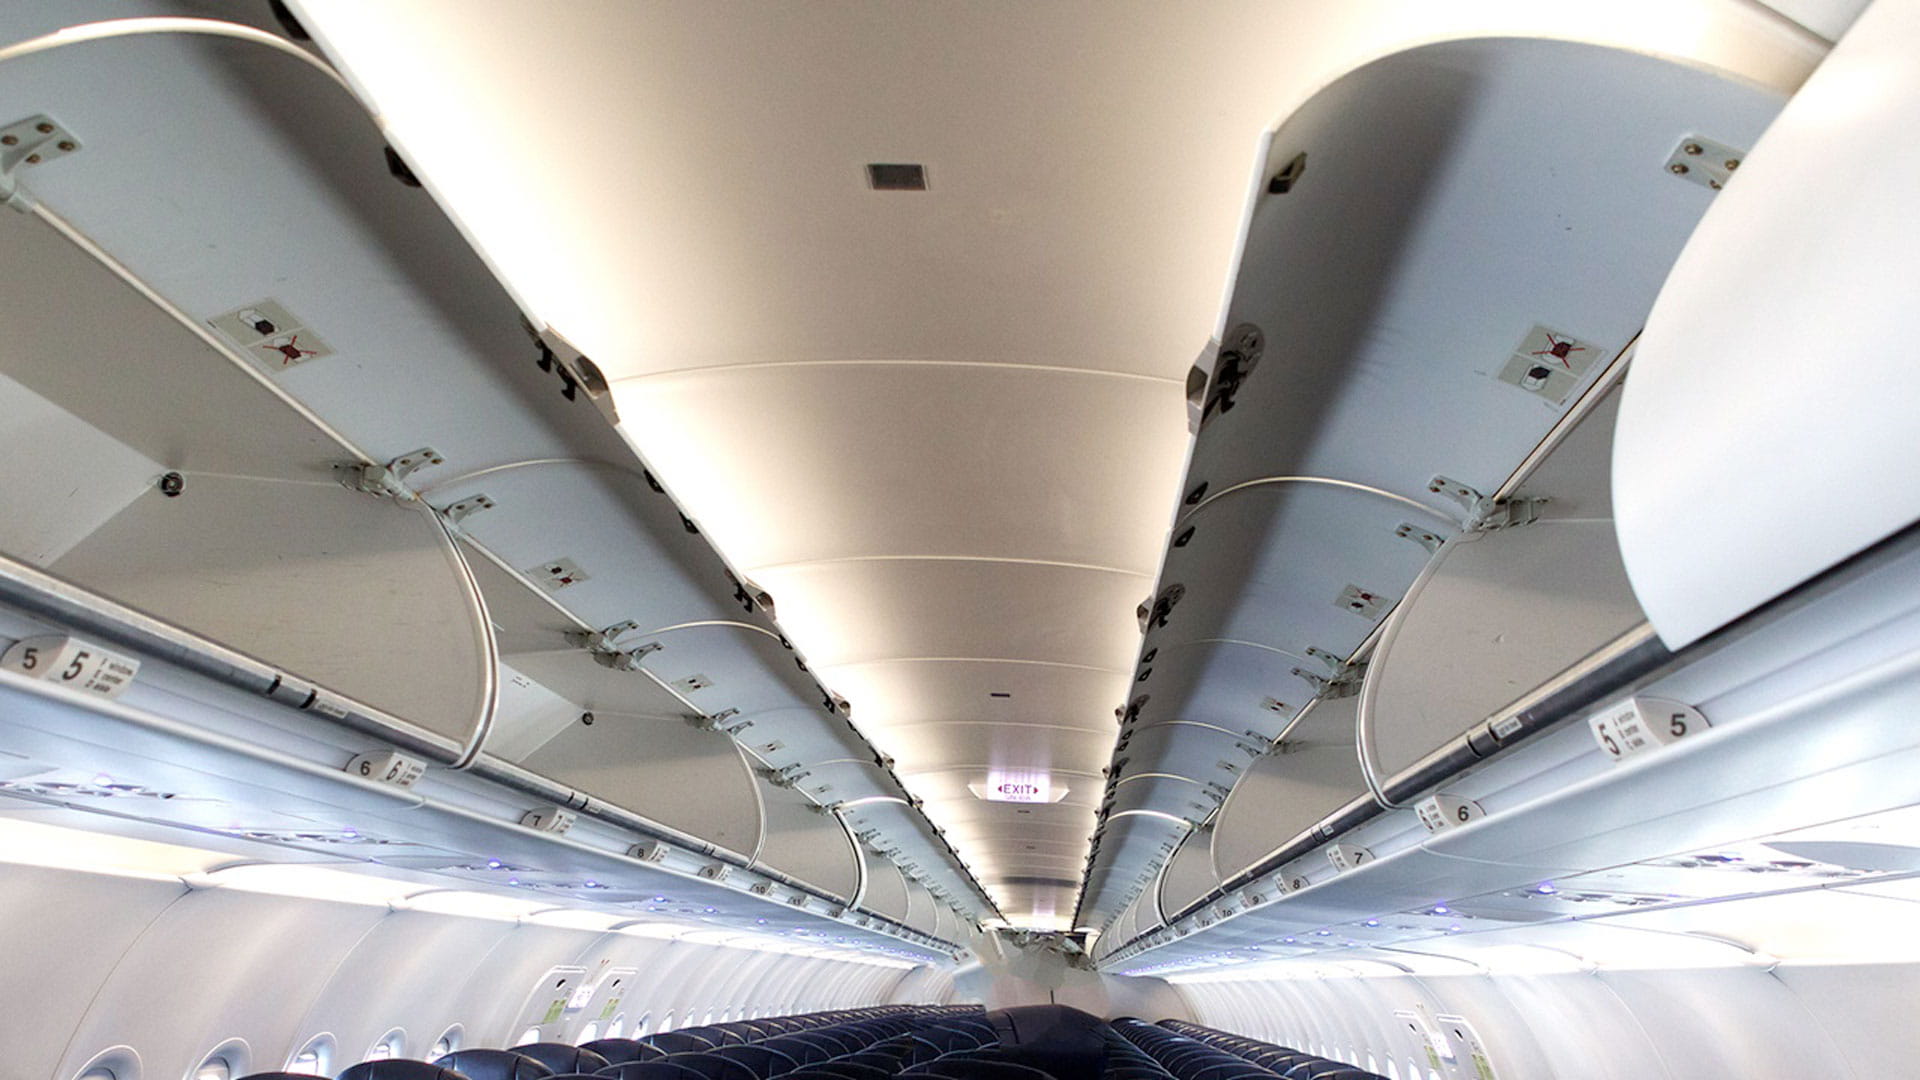 Interior of a commercial aircraft